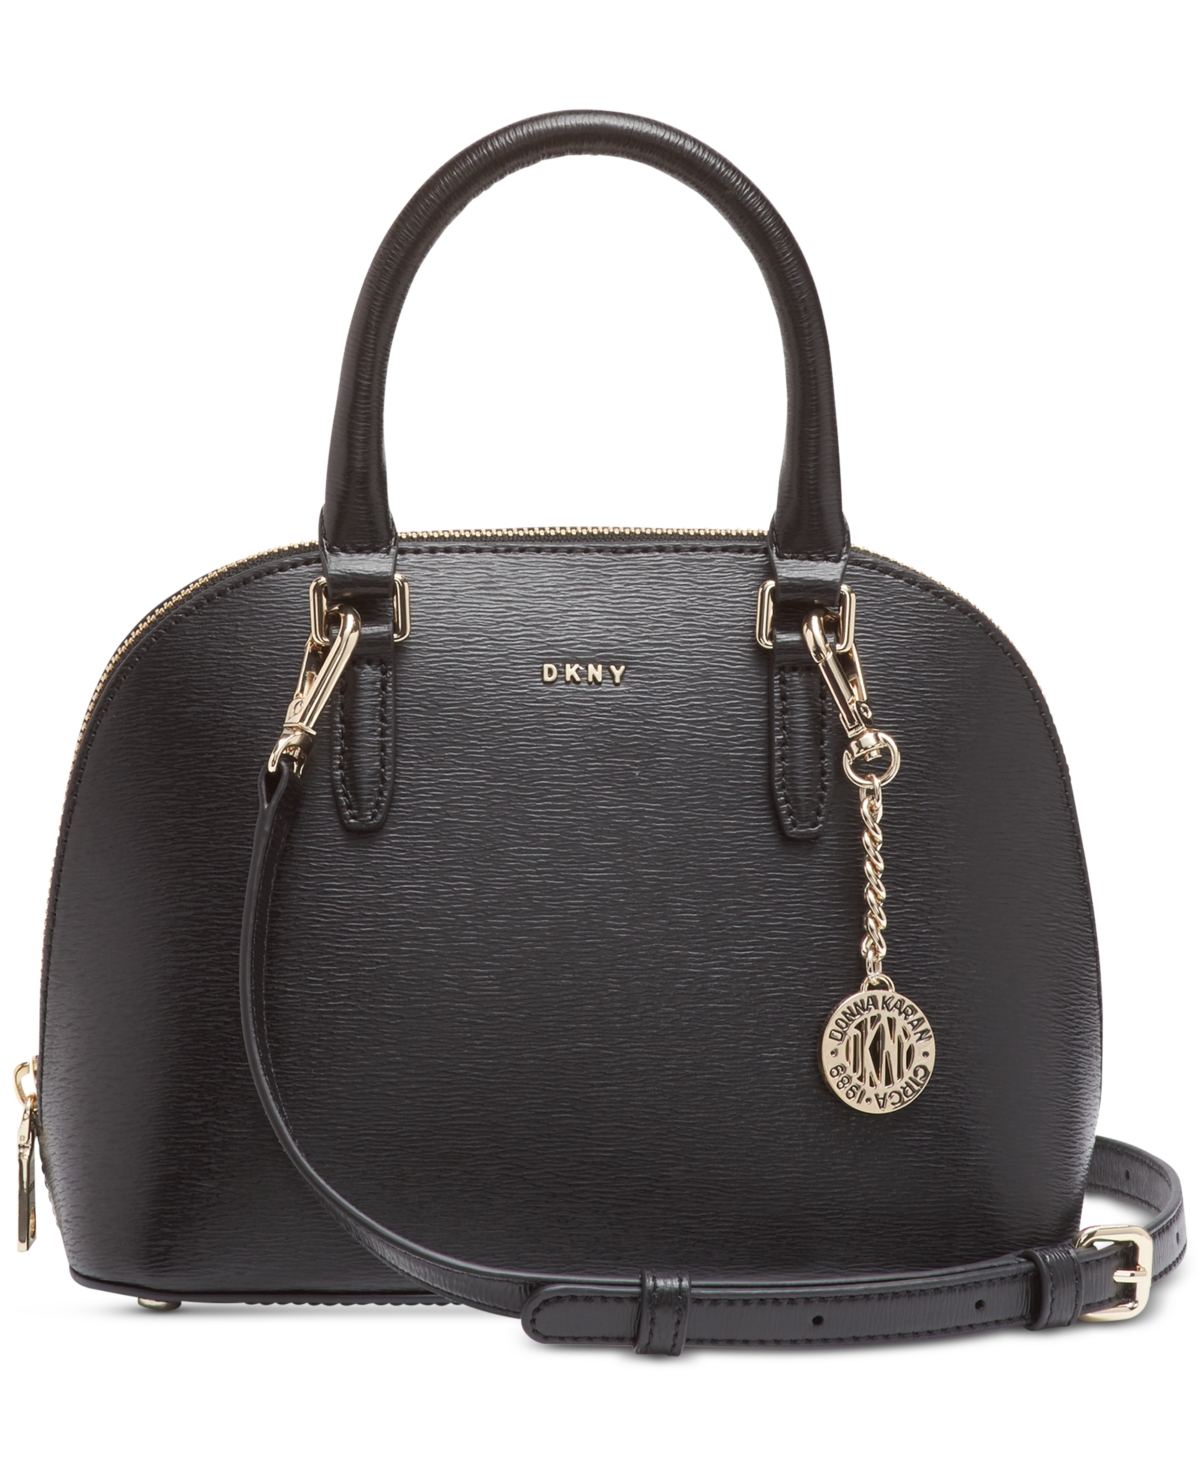 Dkny Bryant Dome Satchel With Convertible Strap In Black,gold Tone